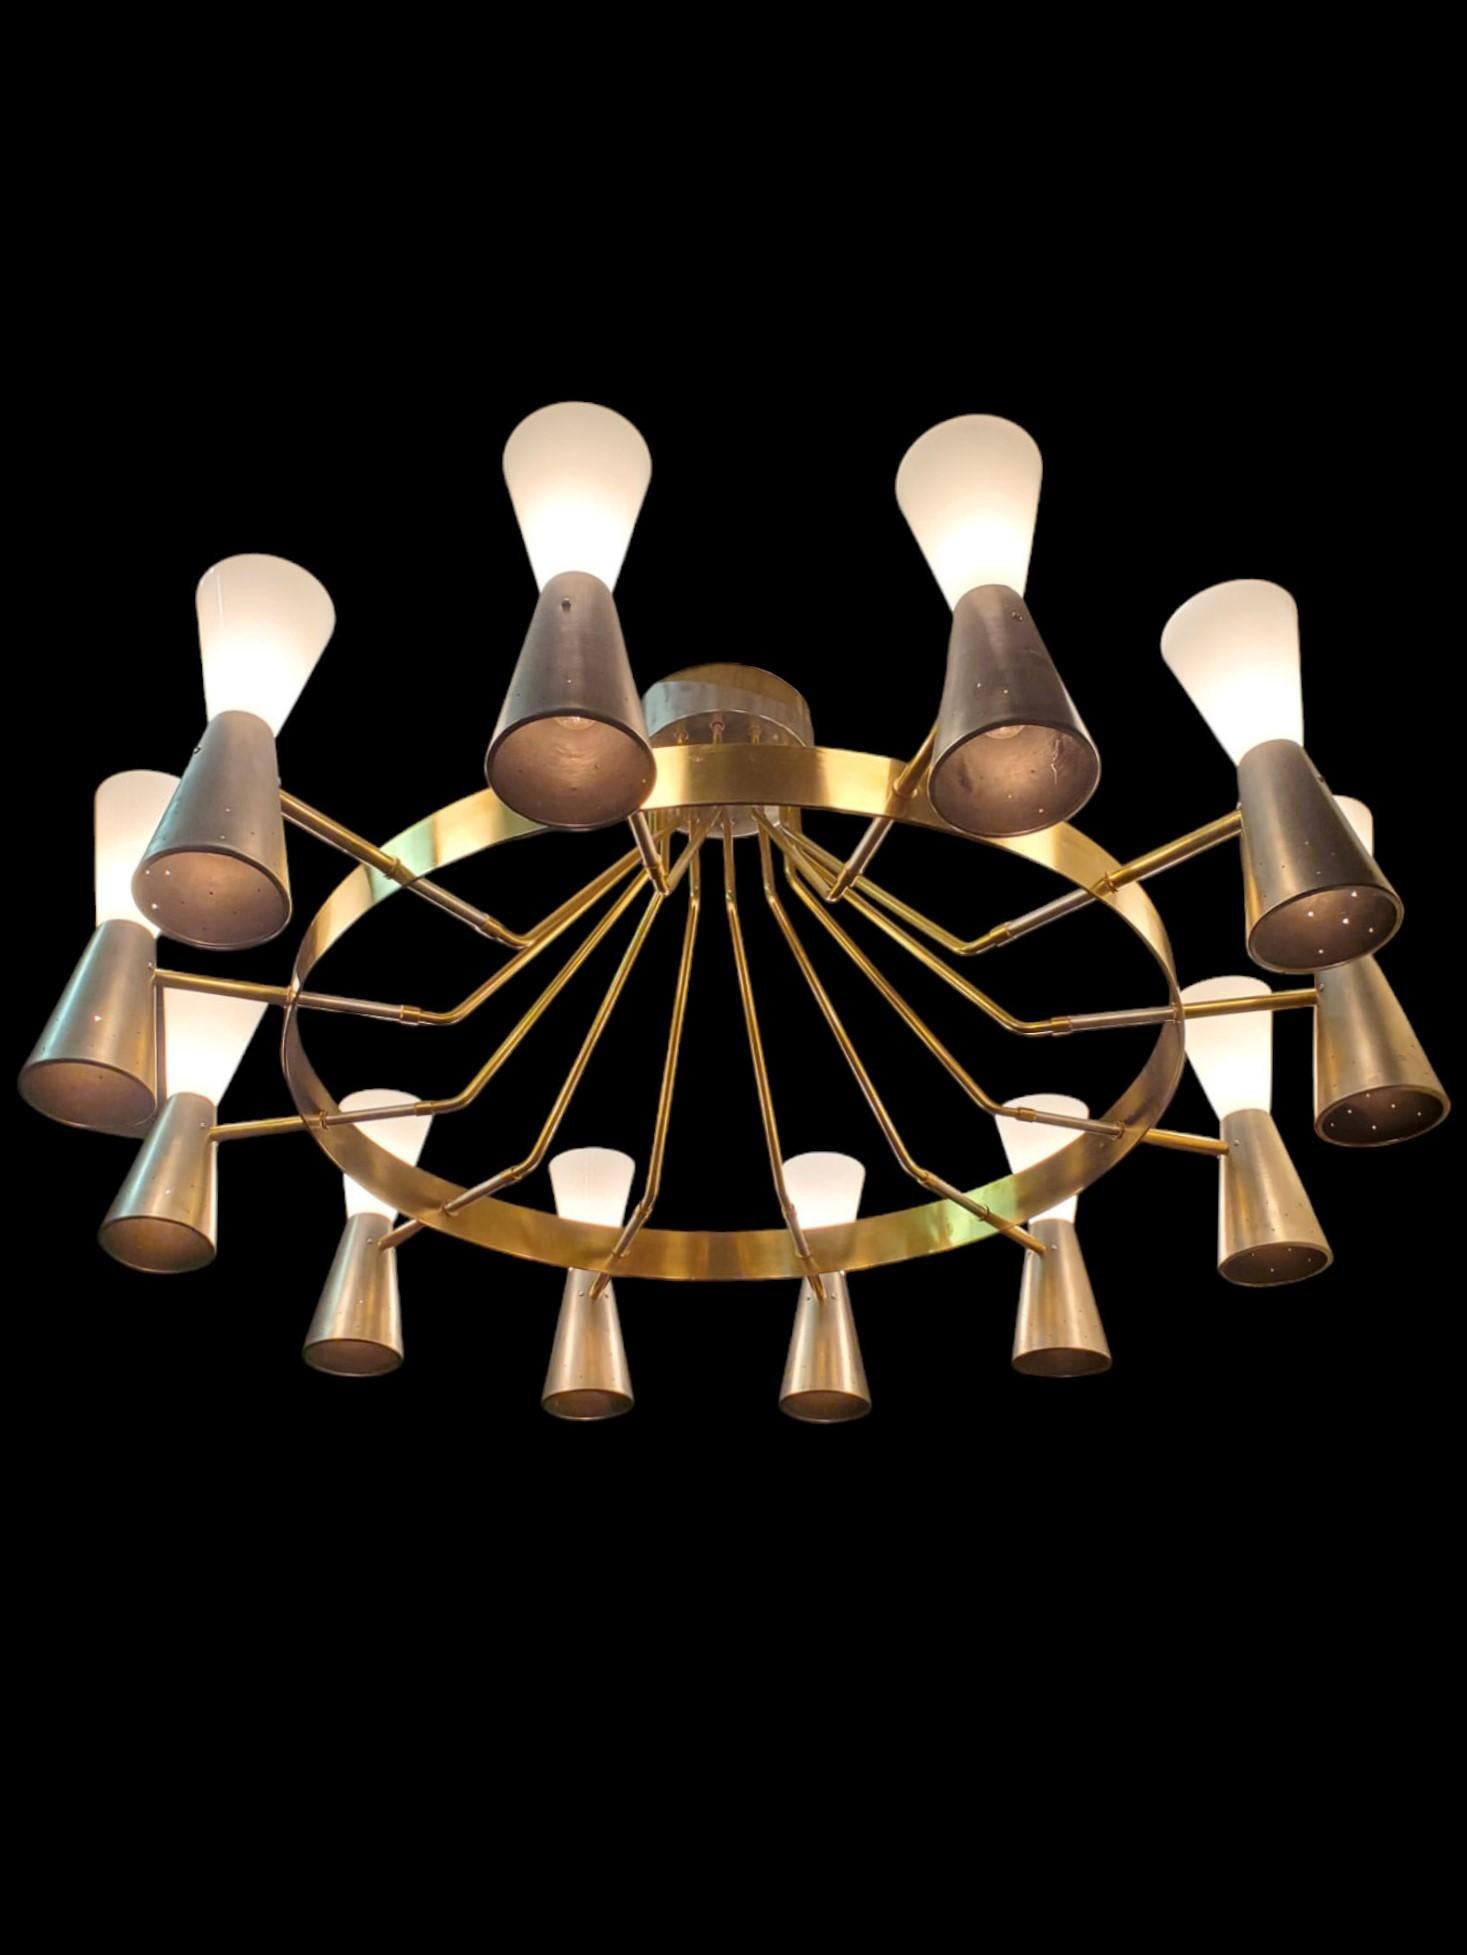 This imposing and majestic original Mid-century Modern chandelier features a substantial 
12-arm / 24-light design.
 A broad brass large ring supports double cone-shaped shades, with the upper shade casting  nice light through opaque white glass and